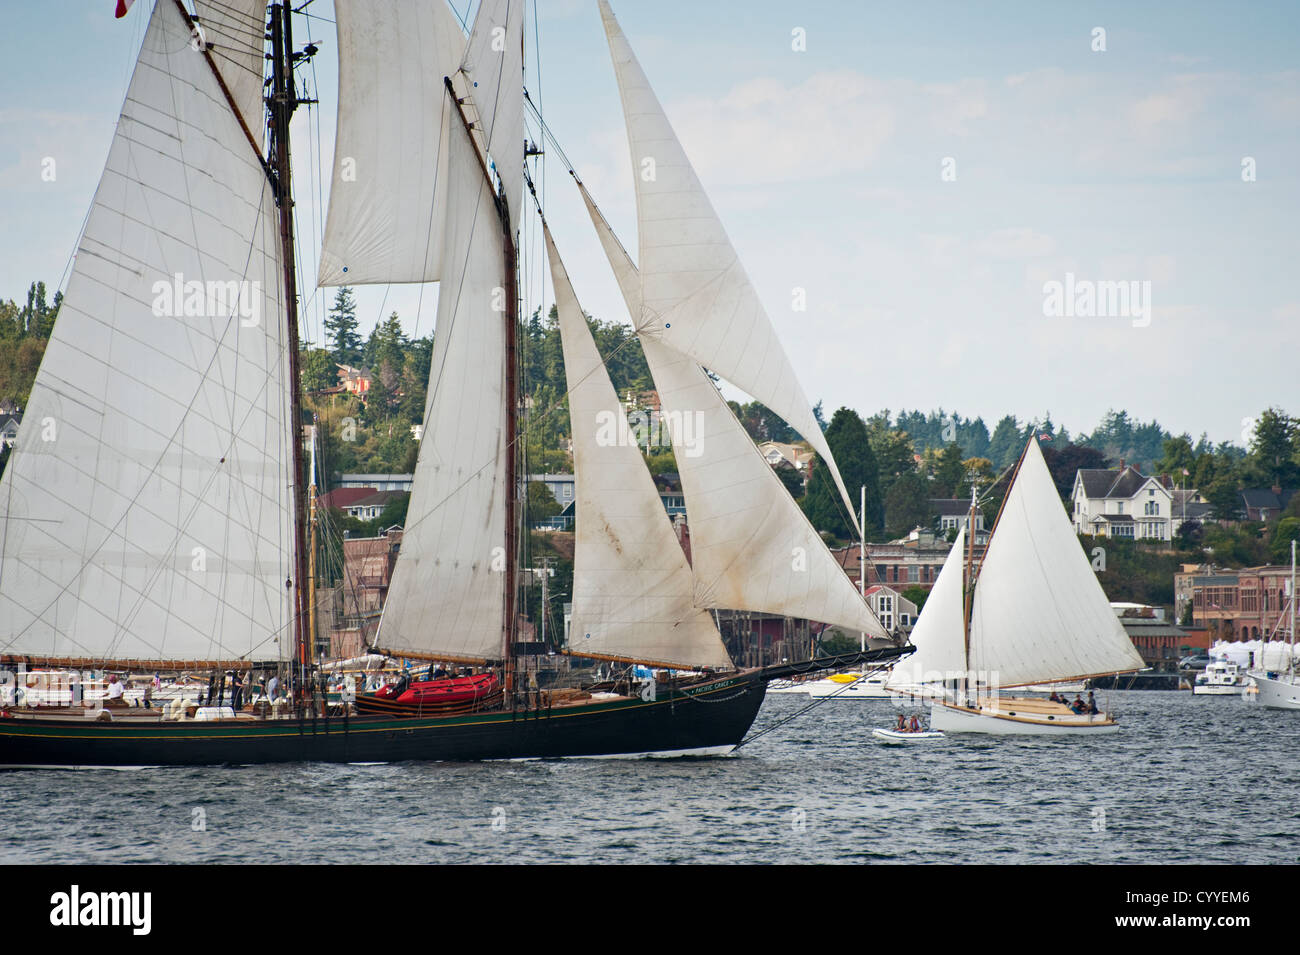 During the Port Townsend Wooden Boat Festival a schooner race was held with many historic wooden tall ships and sailboats. Stock Photo